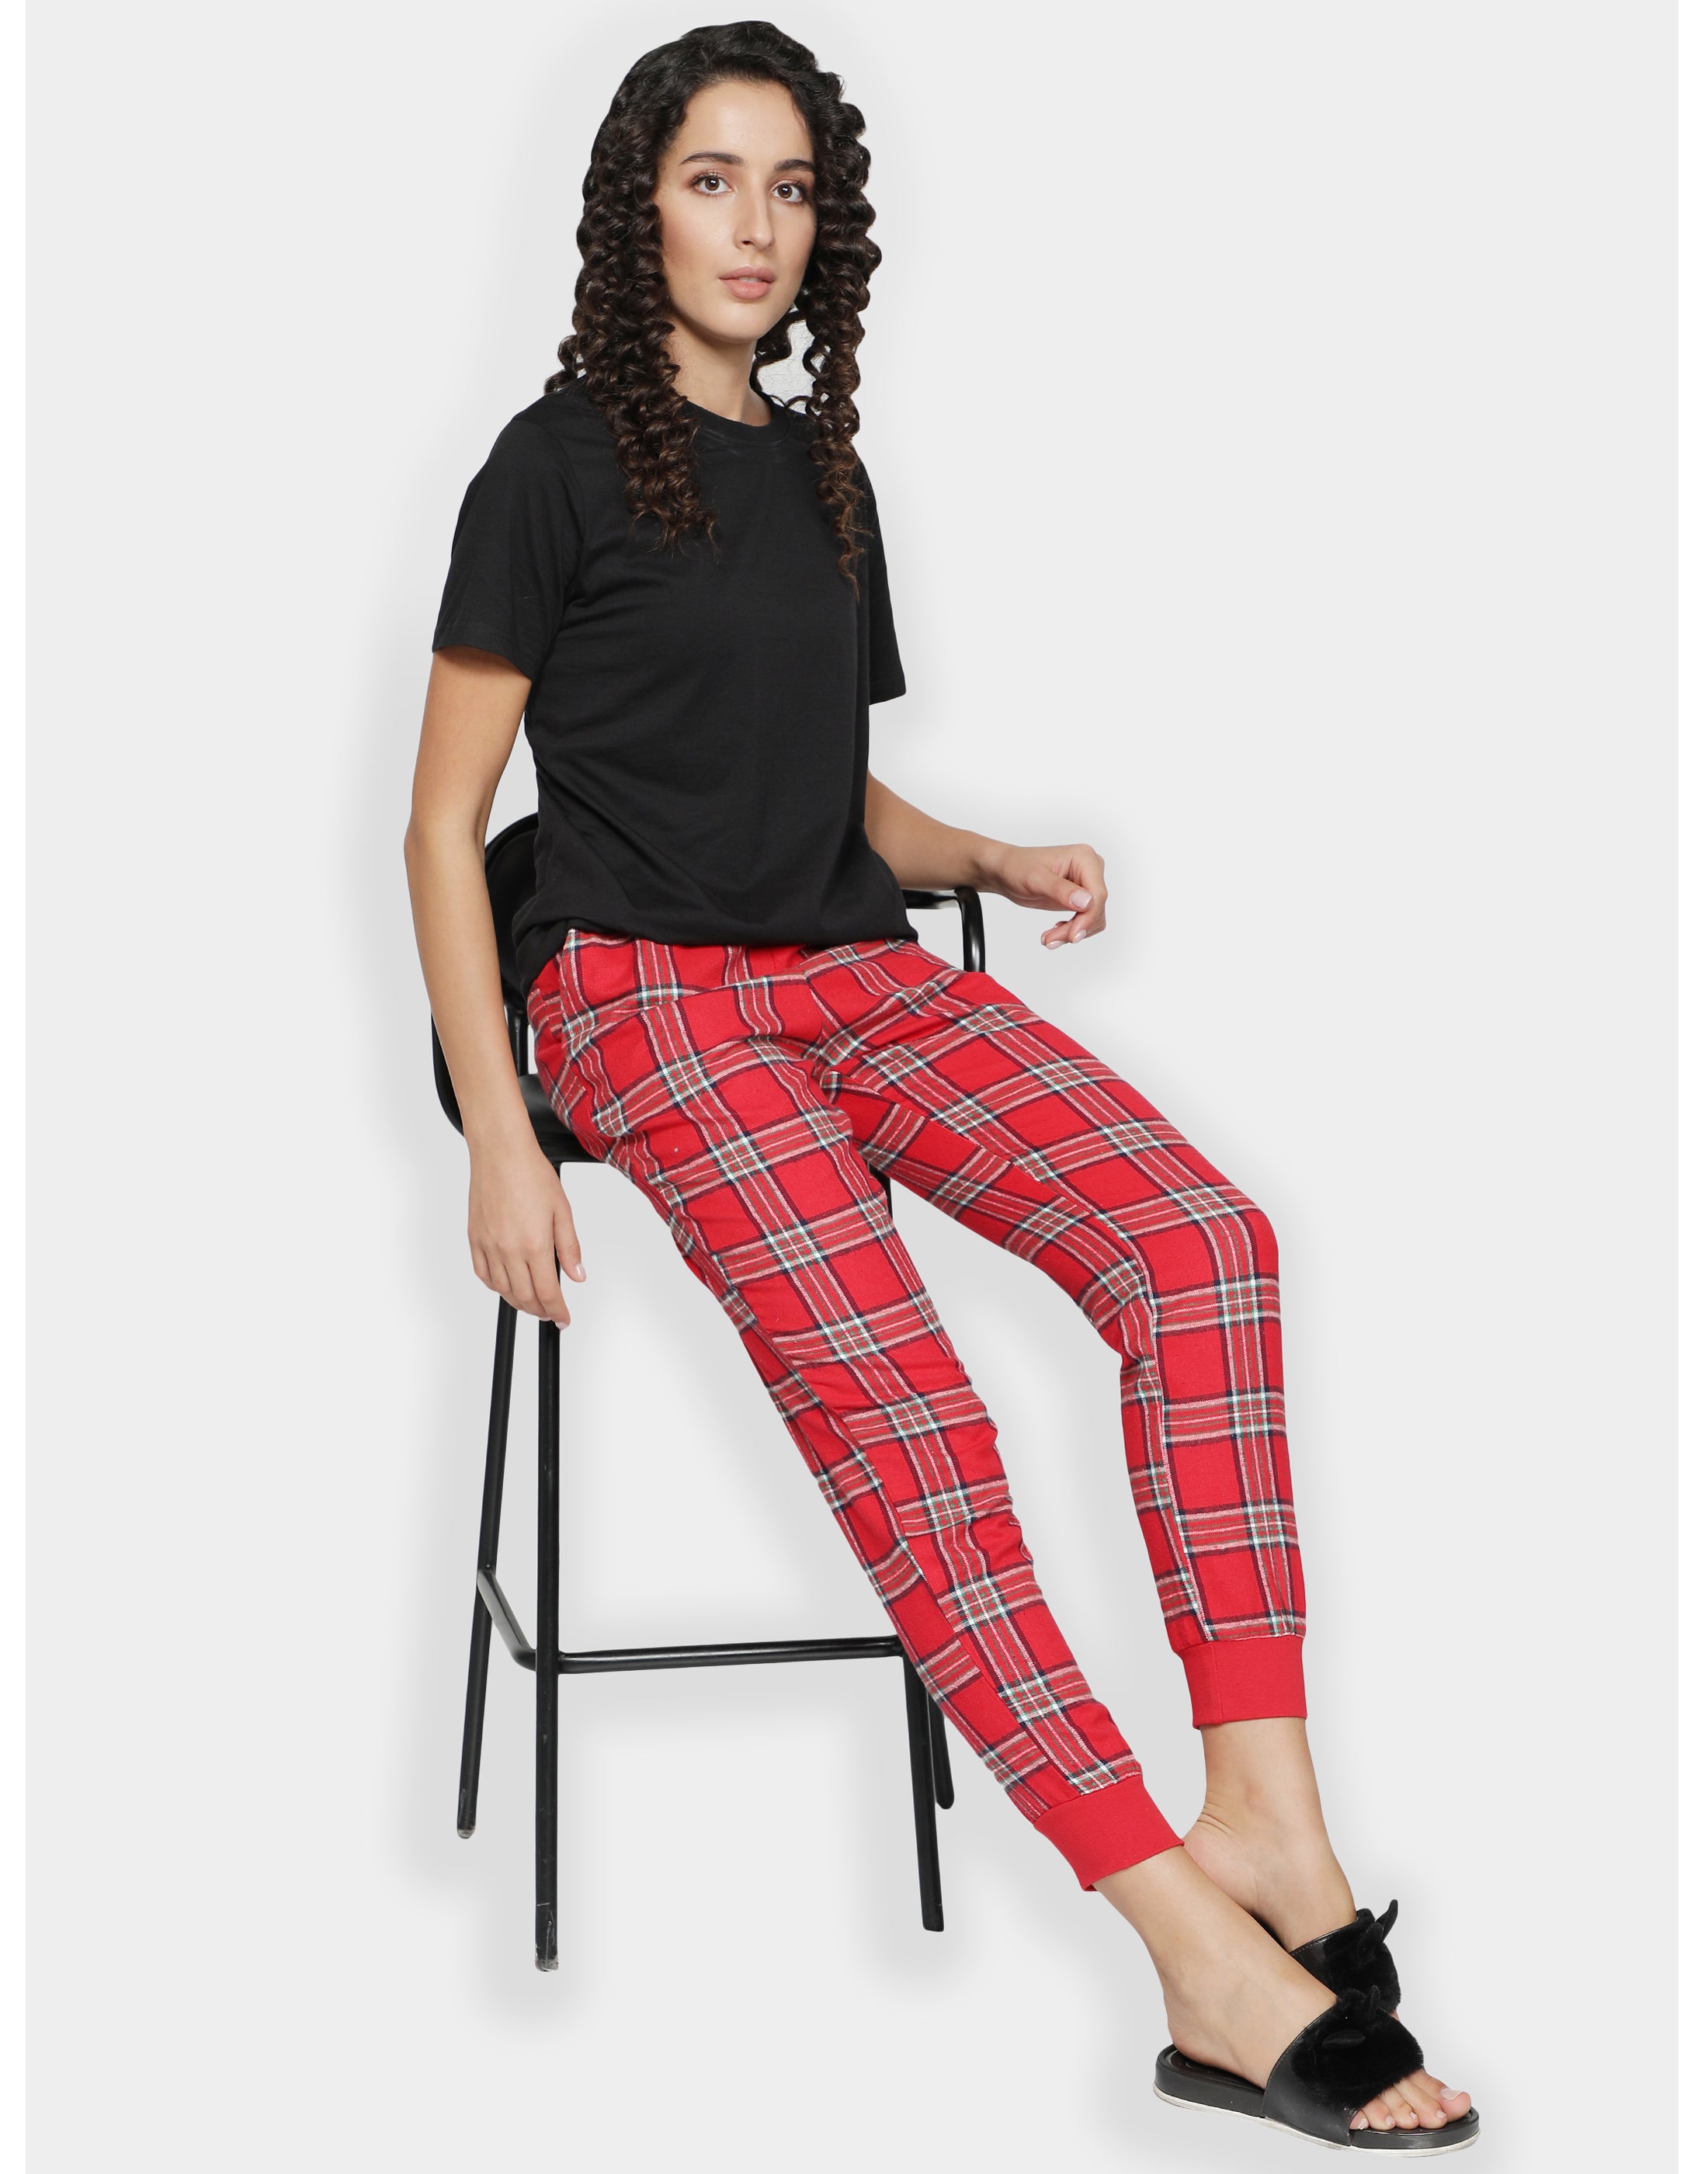 Canrulo Checkerboard Print Pants for Women High Waist Plaid Casual Trousers  Pants Pink L - Walmart.com